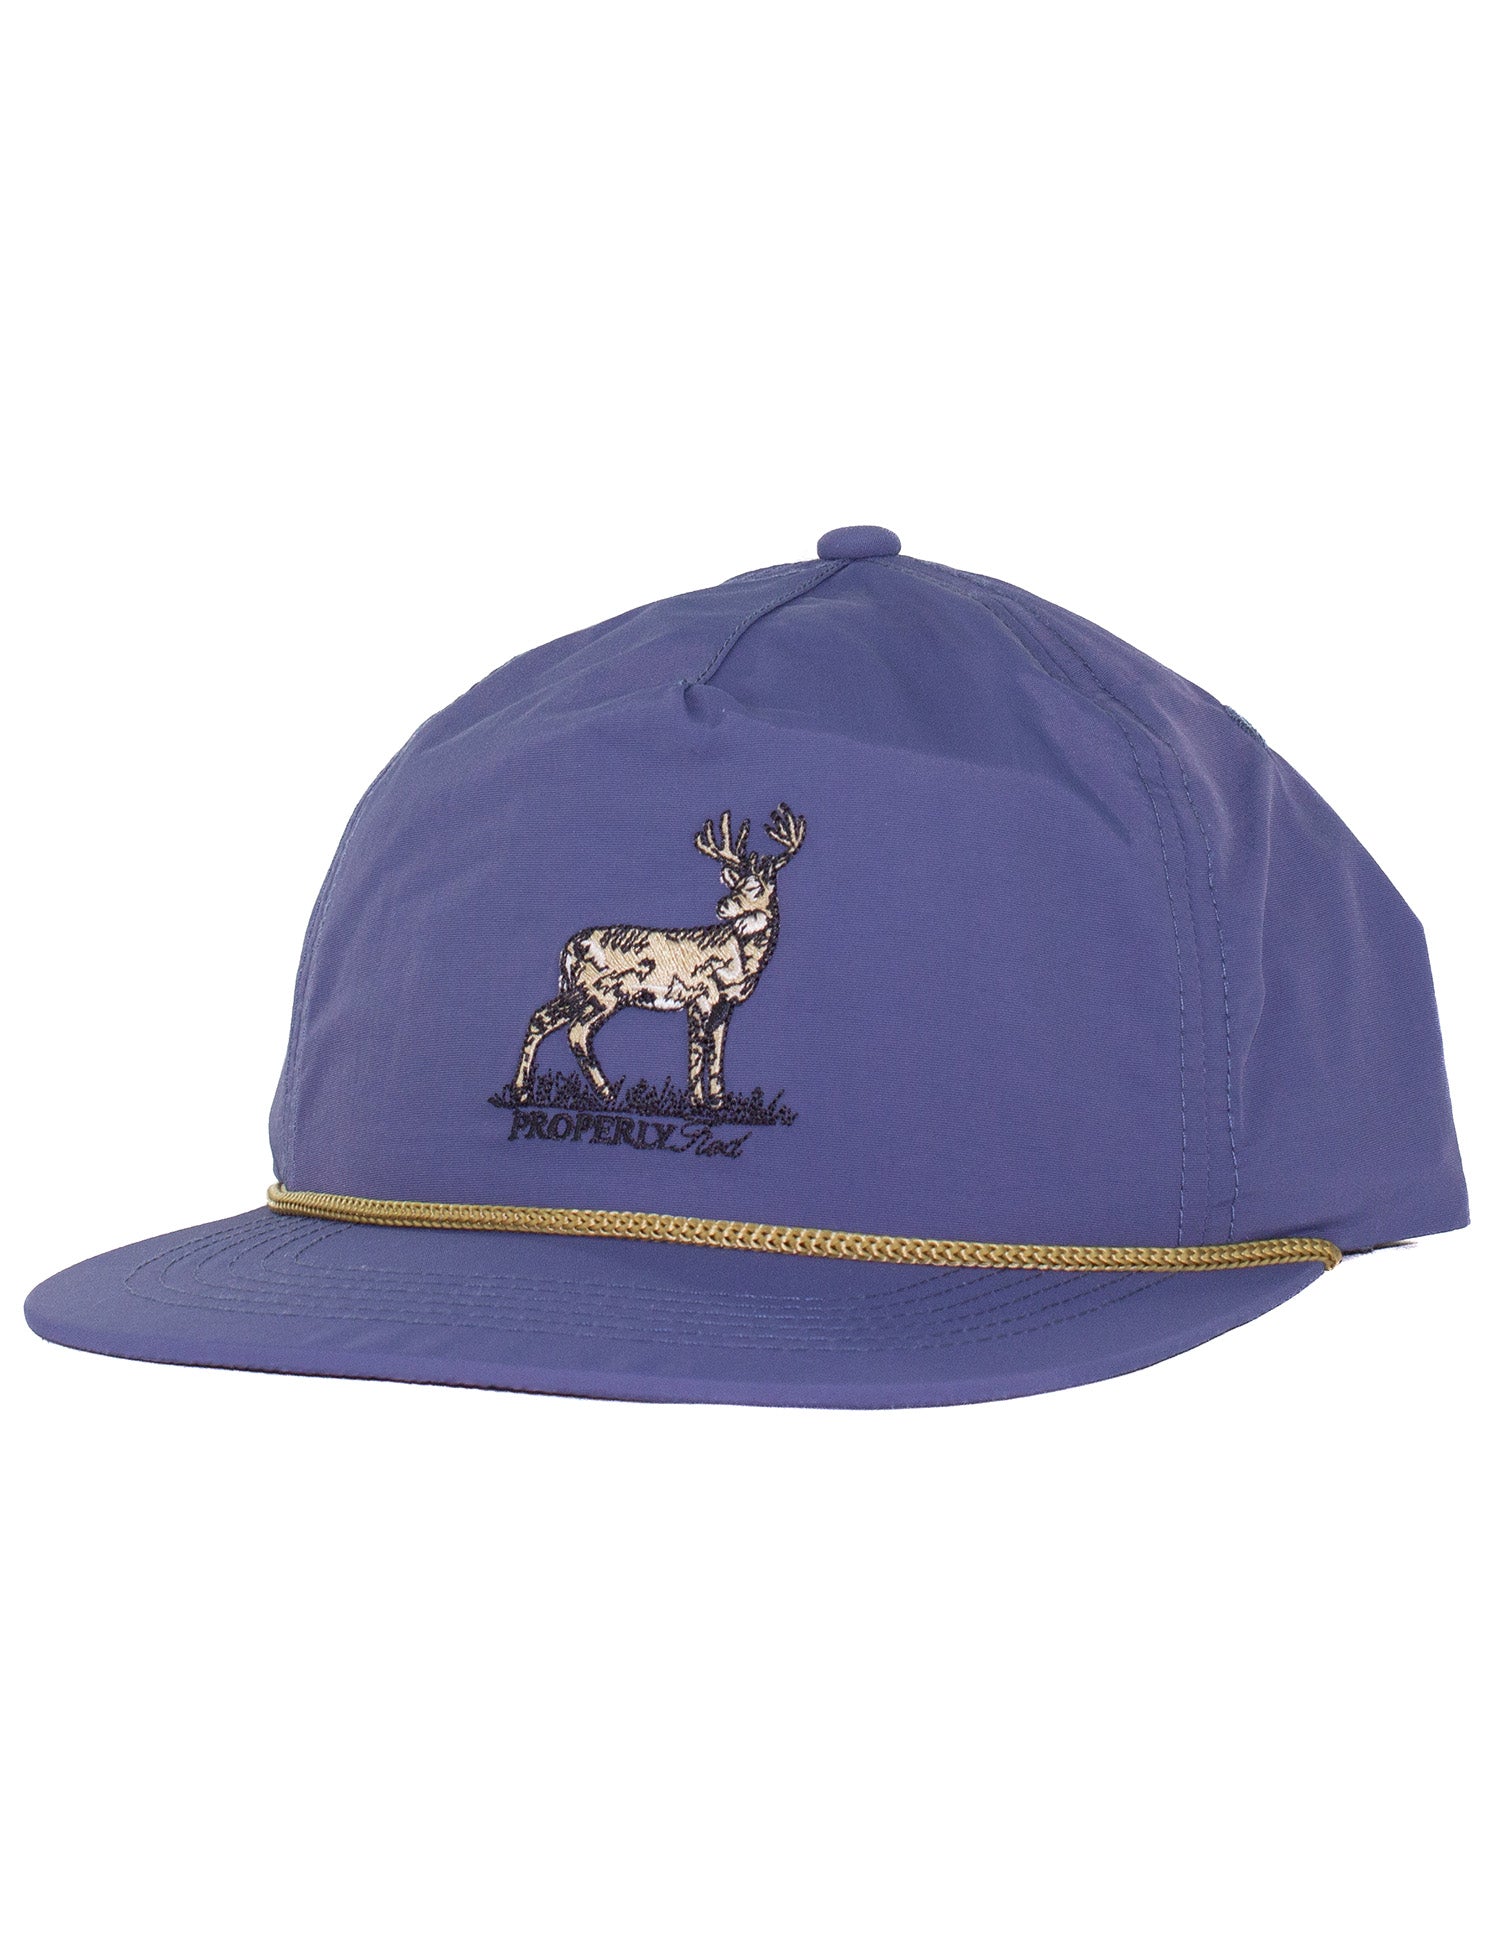 Boys Rope Hat Whitetail